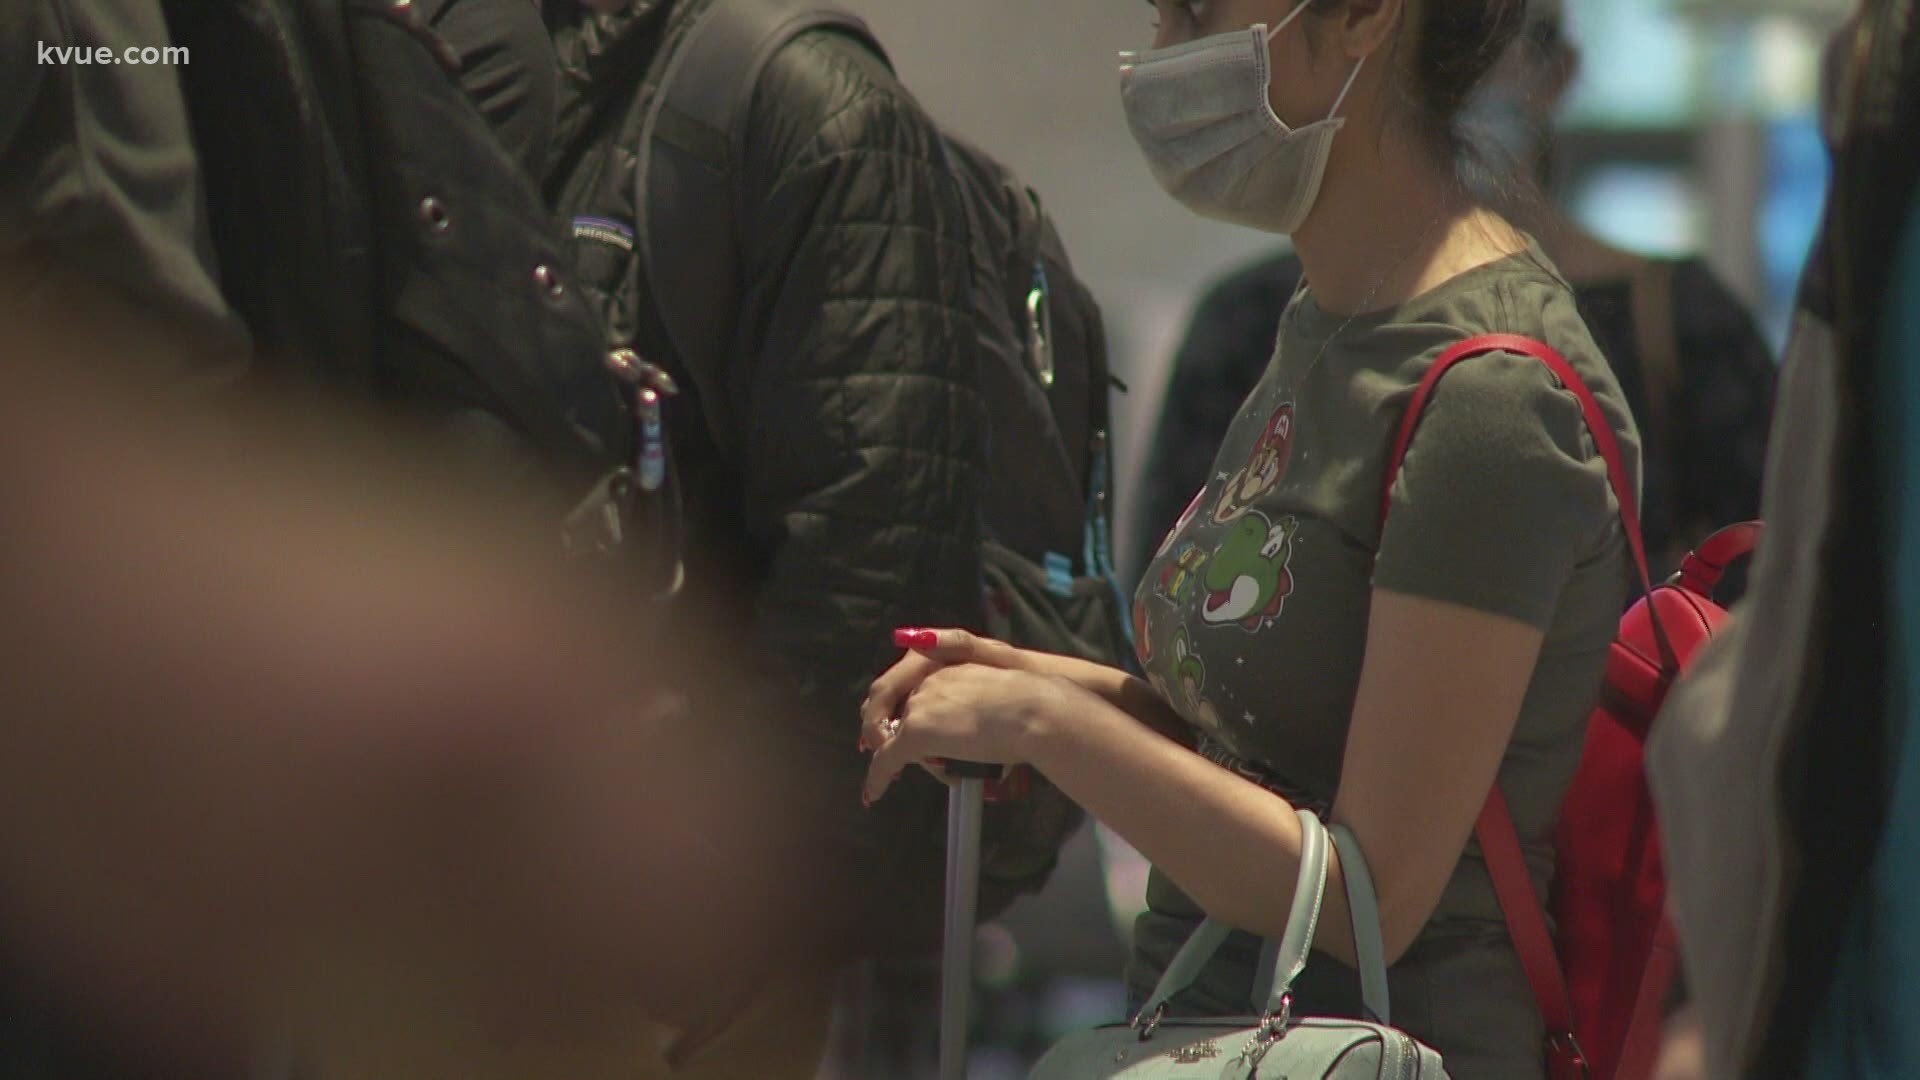 If you traveled for Thanksgiving, health officials say it's important to get tested. But you might not want to do it as soon as you get back into town.